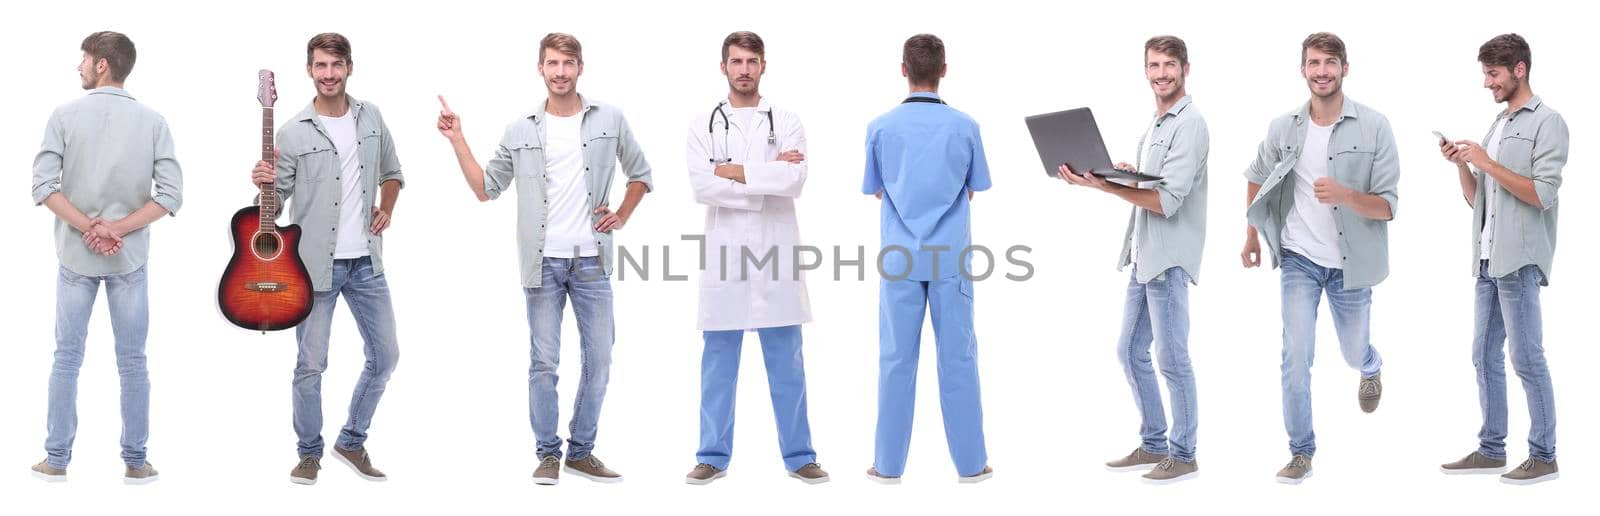 collage doctor and young man isolated on white by asdf